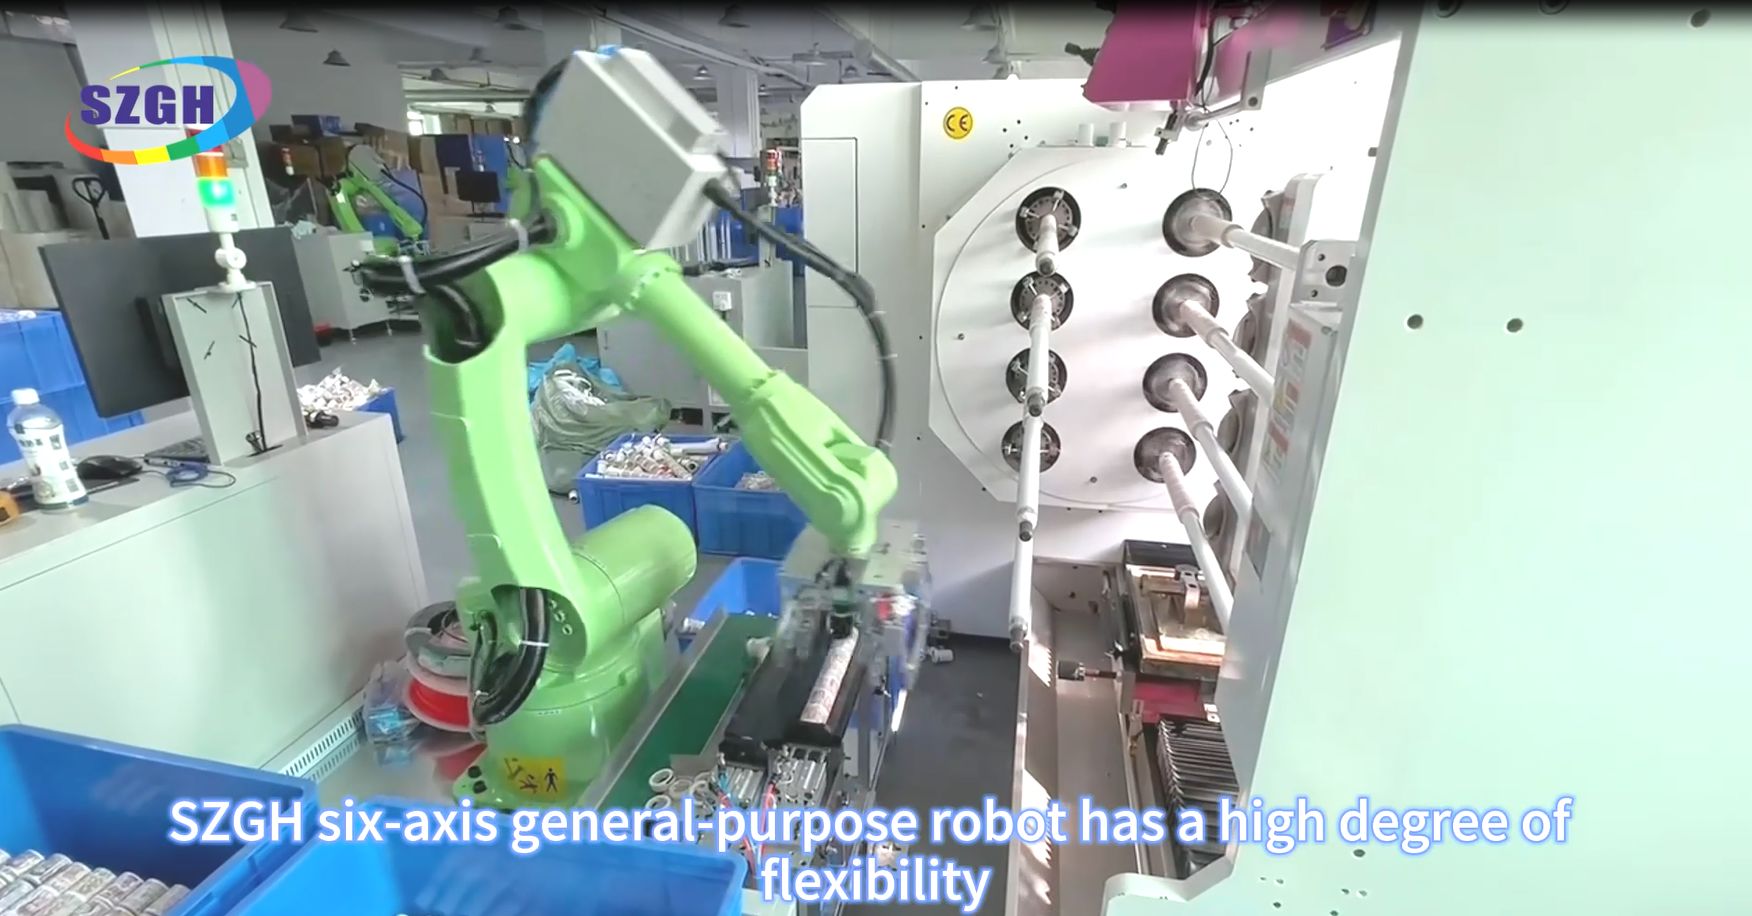 SZGH six-axis general purpose robot has a high degree of flexibility,   And can be matched with different fixtures to achieve different functions according to production needs